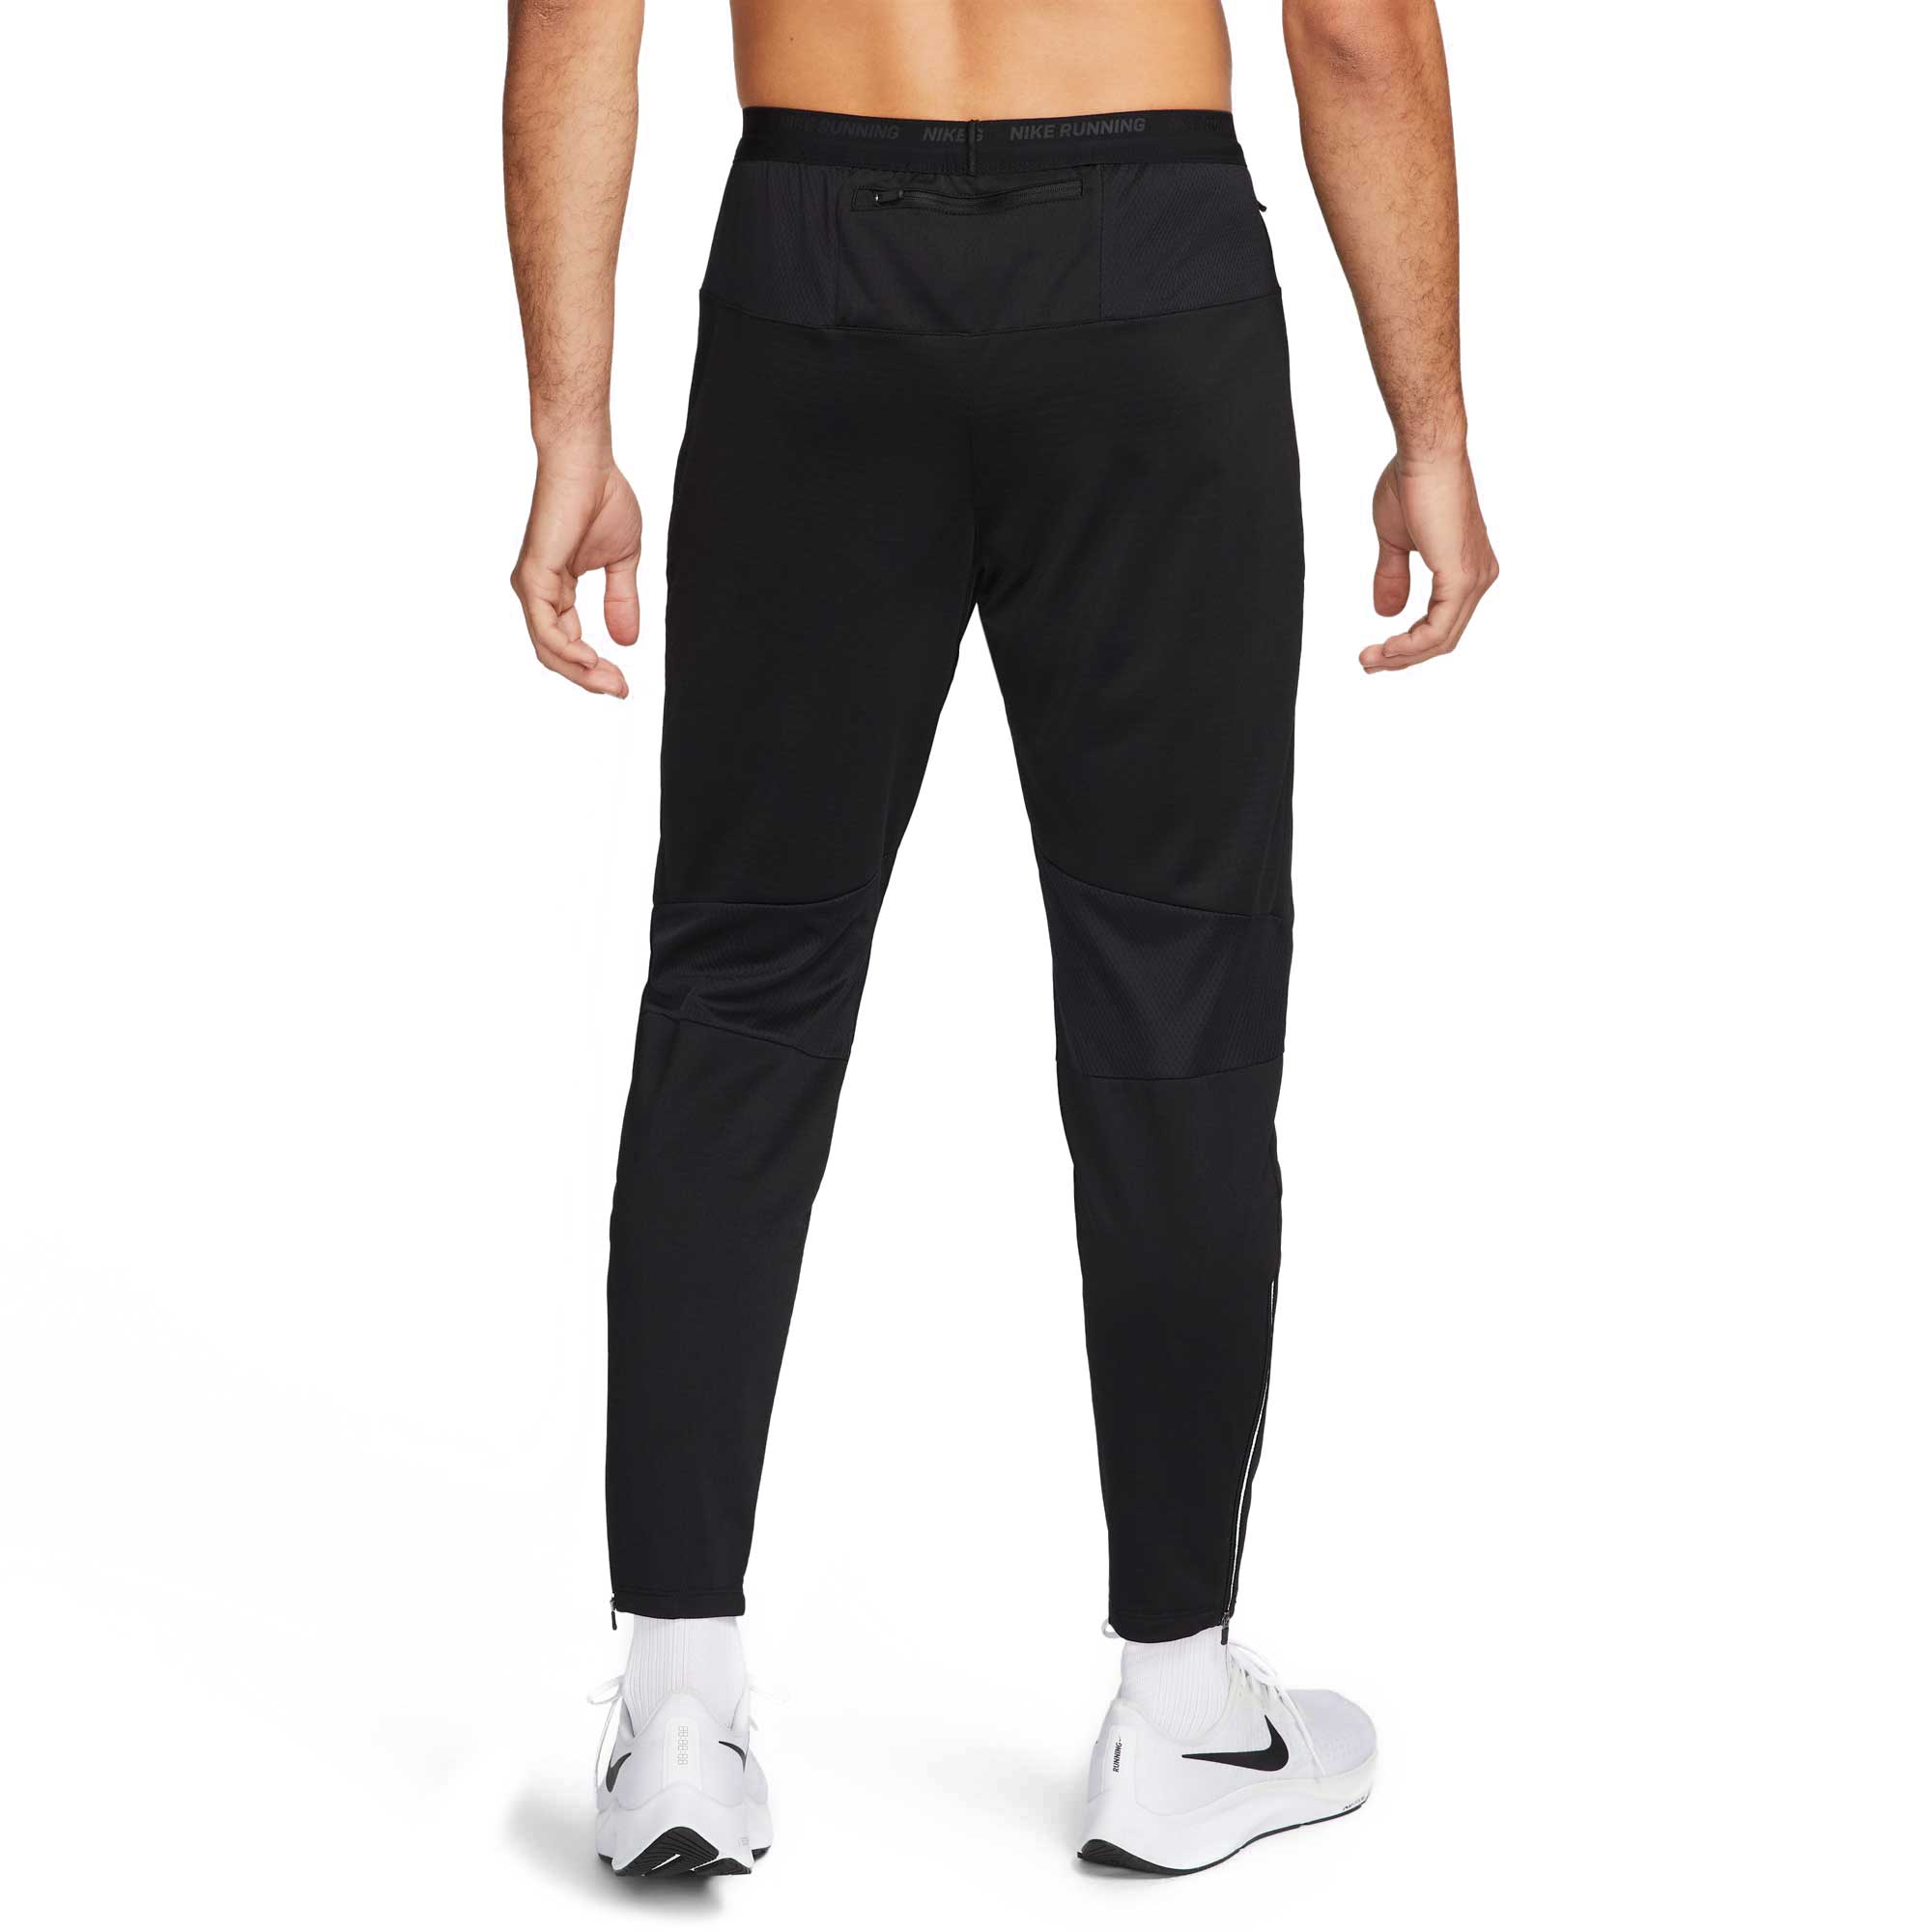 Top-Quality Nike Training Warm-Up Pants | S&R Sport